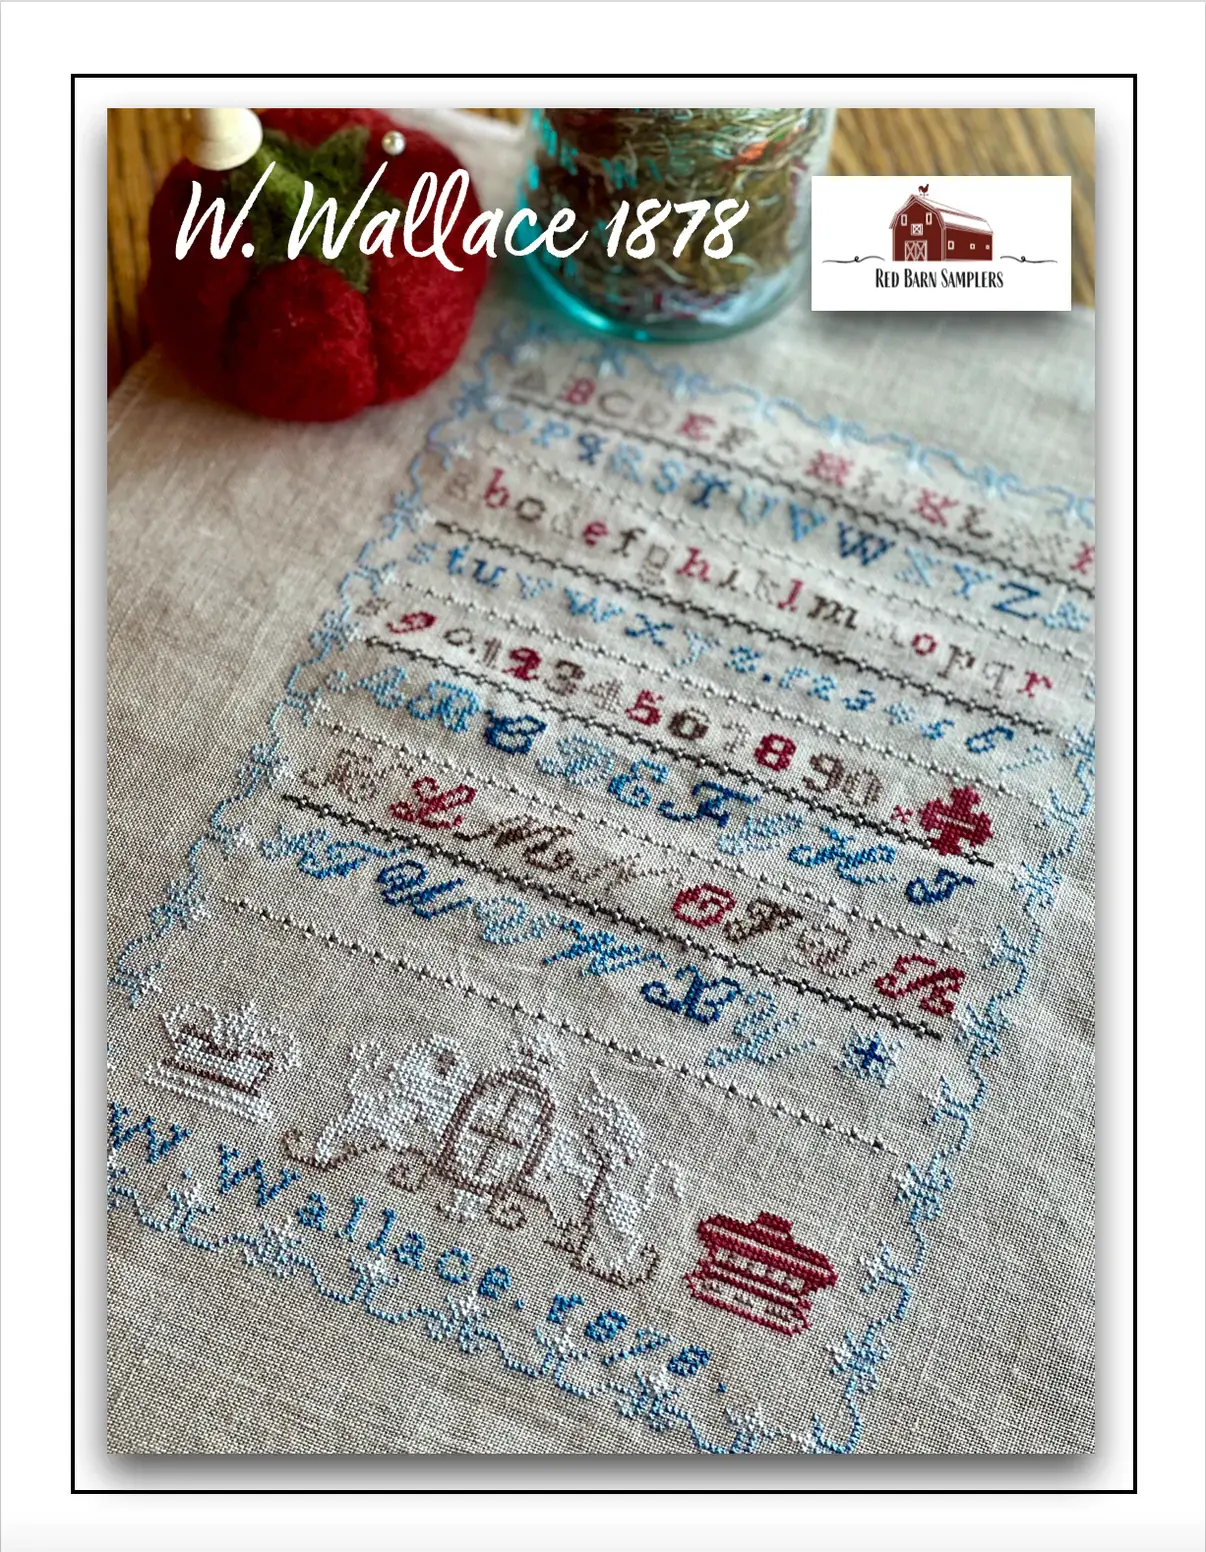 W. Wallace 1878 by Red Barn Samplers Red Barn Samplers